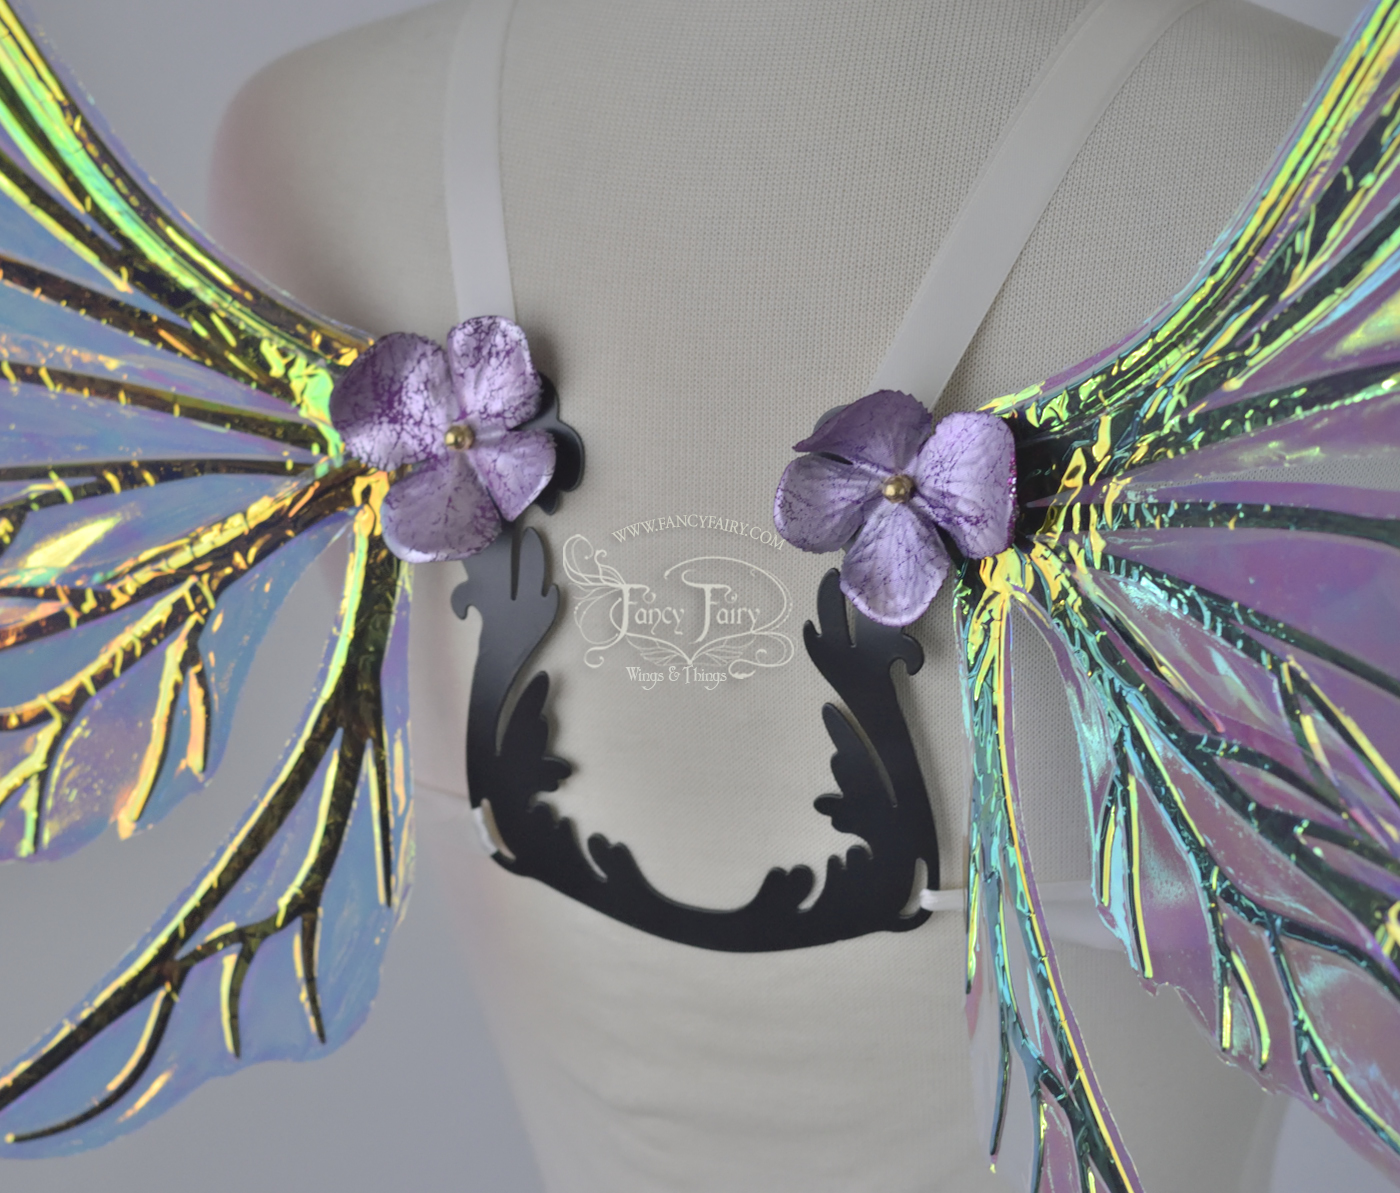 Elvina Iridescent Convertible Fairy Wings in Spiked Punch with Copper veins